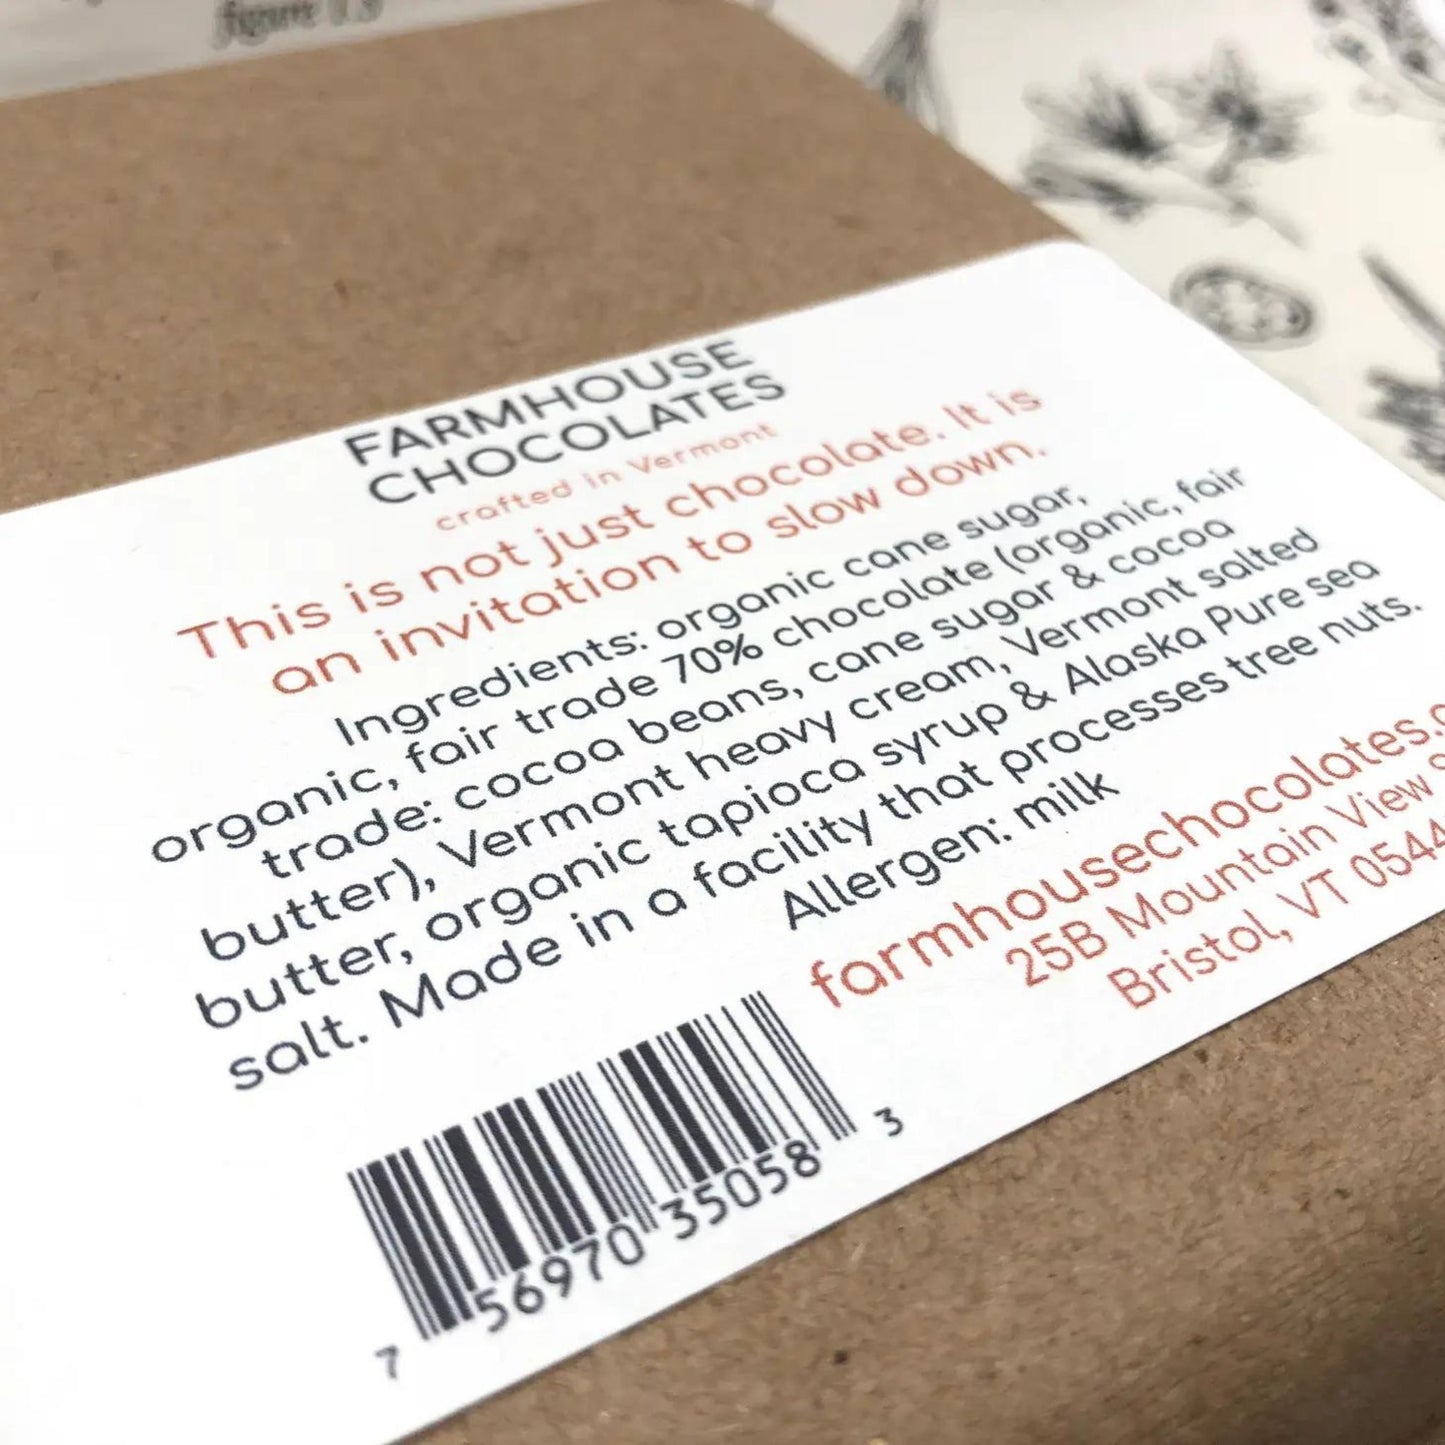 Shows the back of the Dark Chocolate Salted Caramels package with all its ingredients.